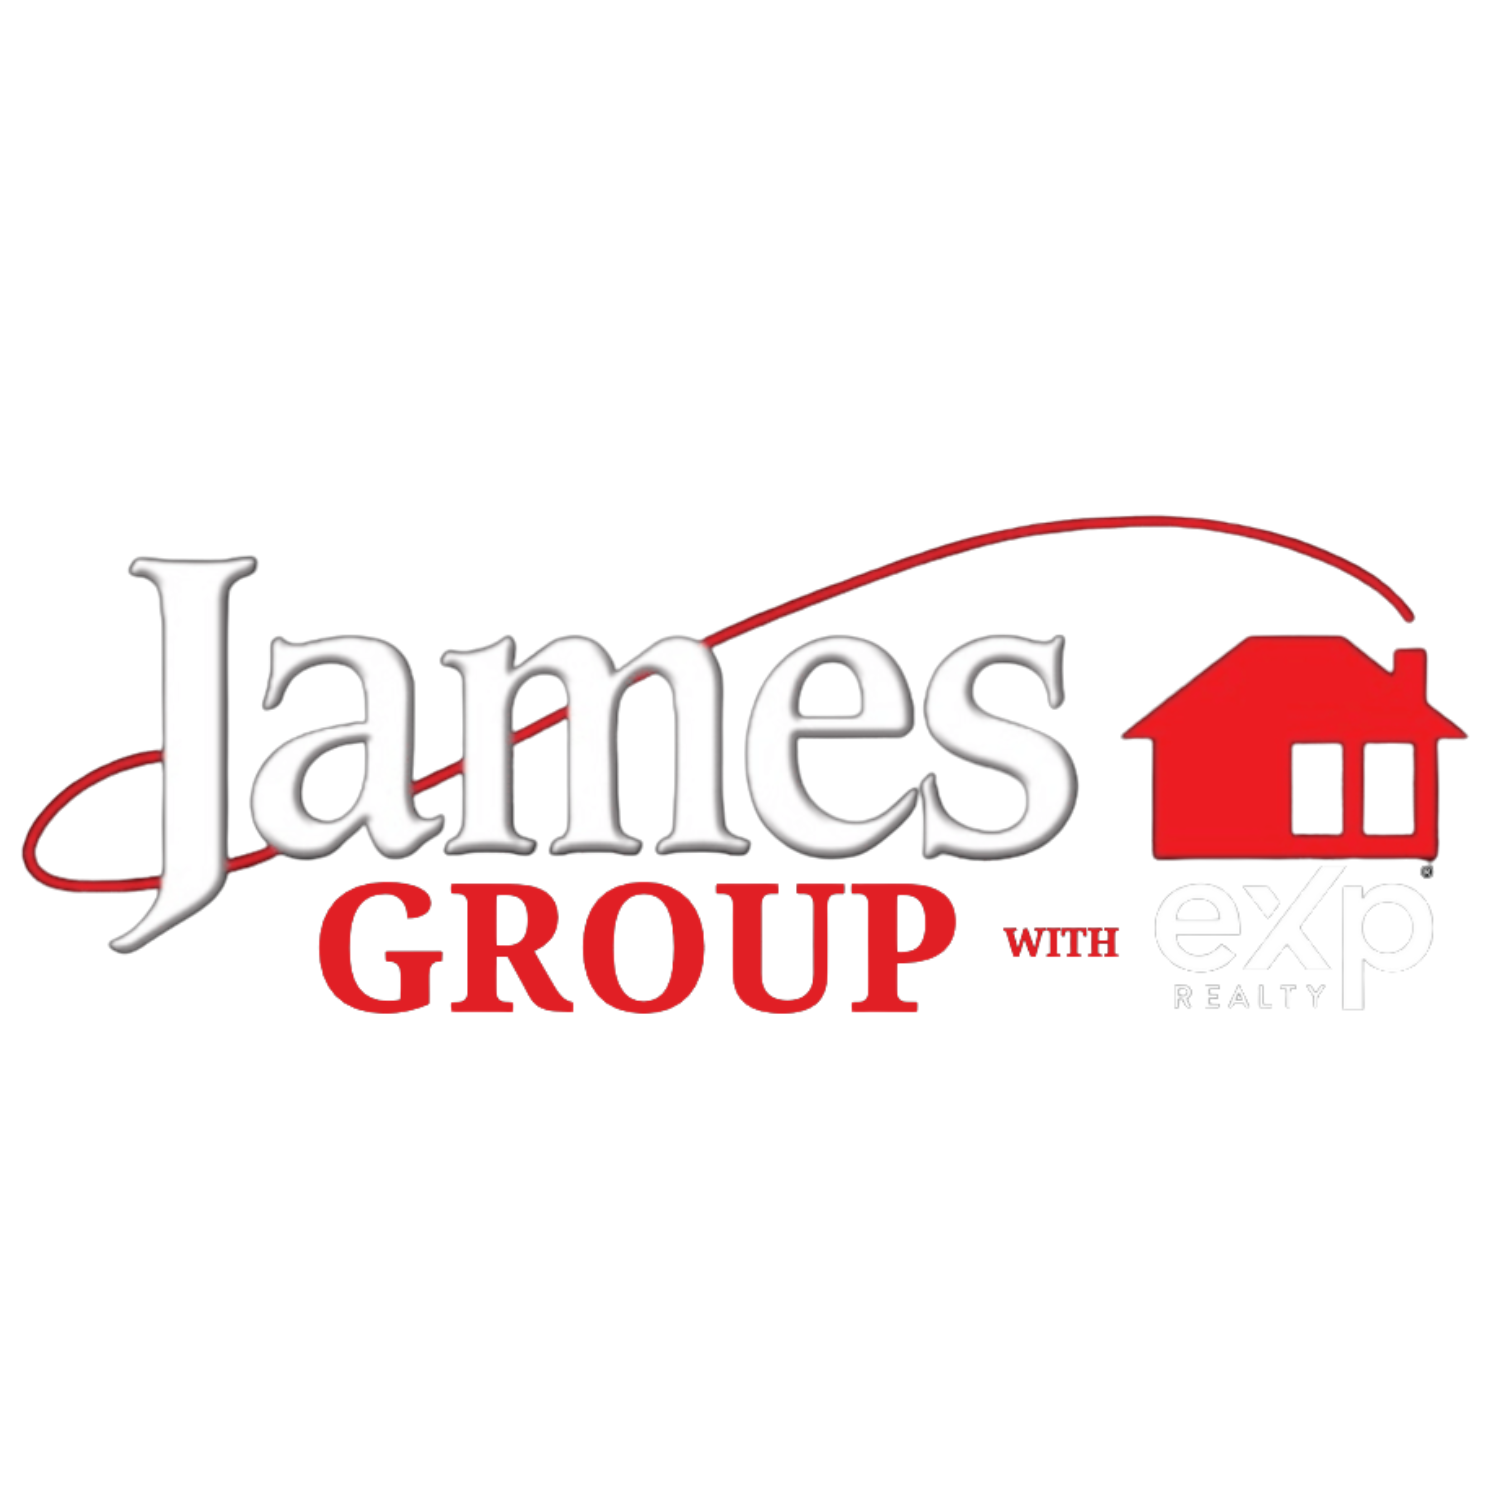 James Group with eXp Realty